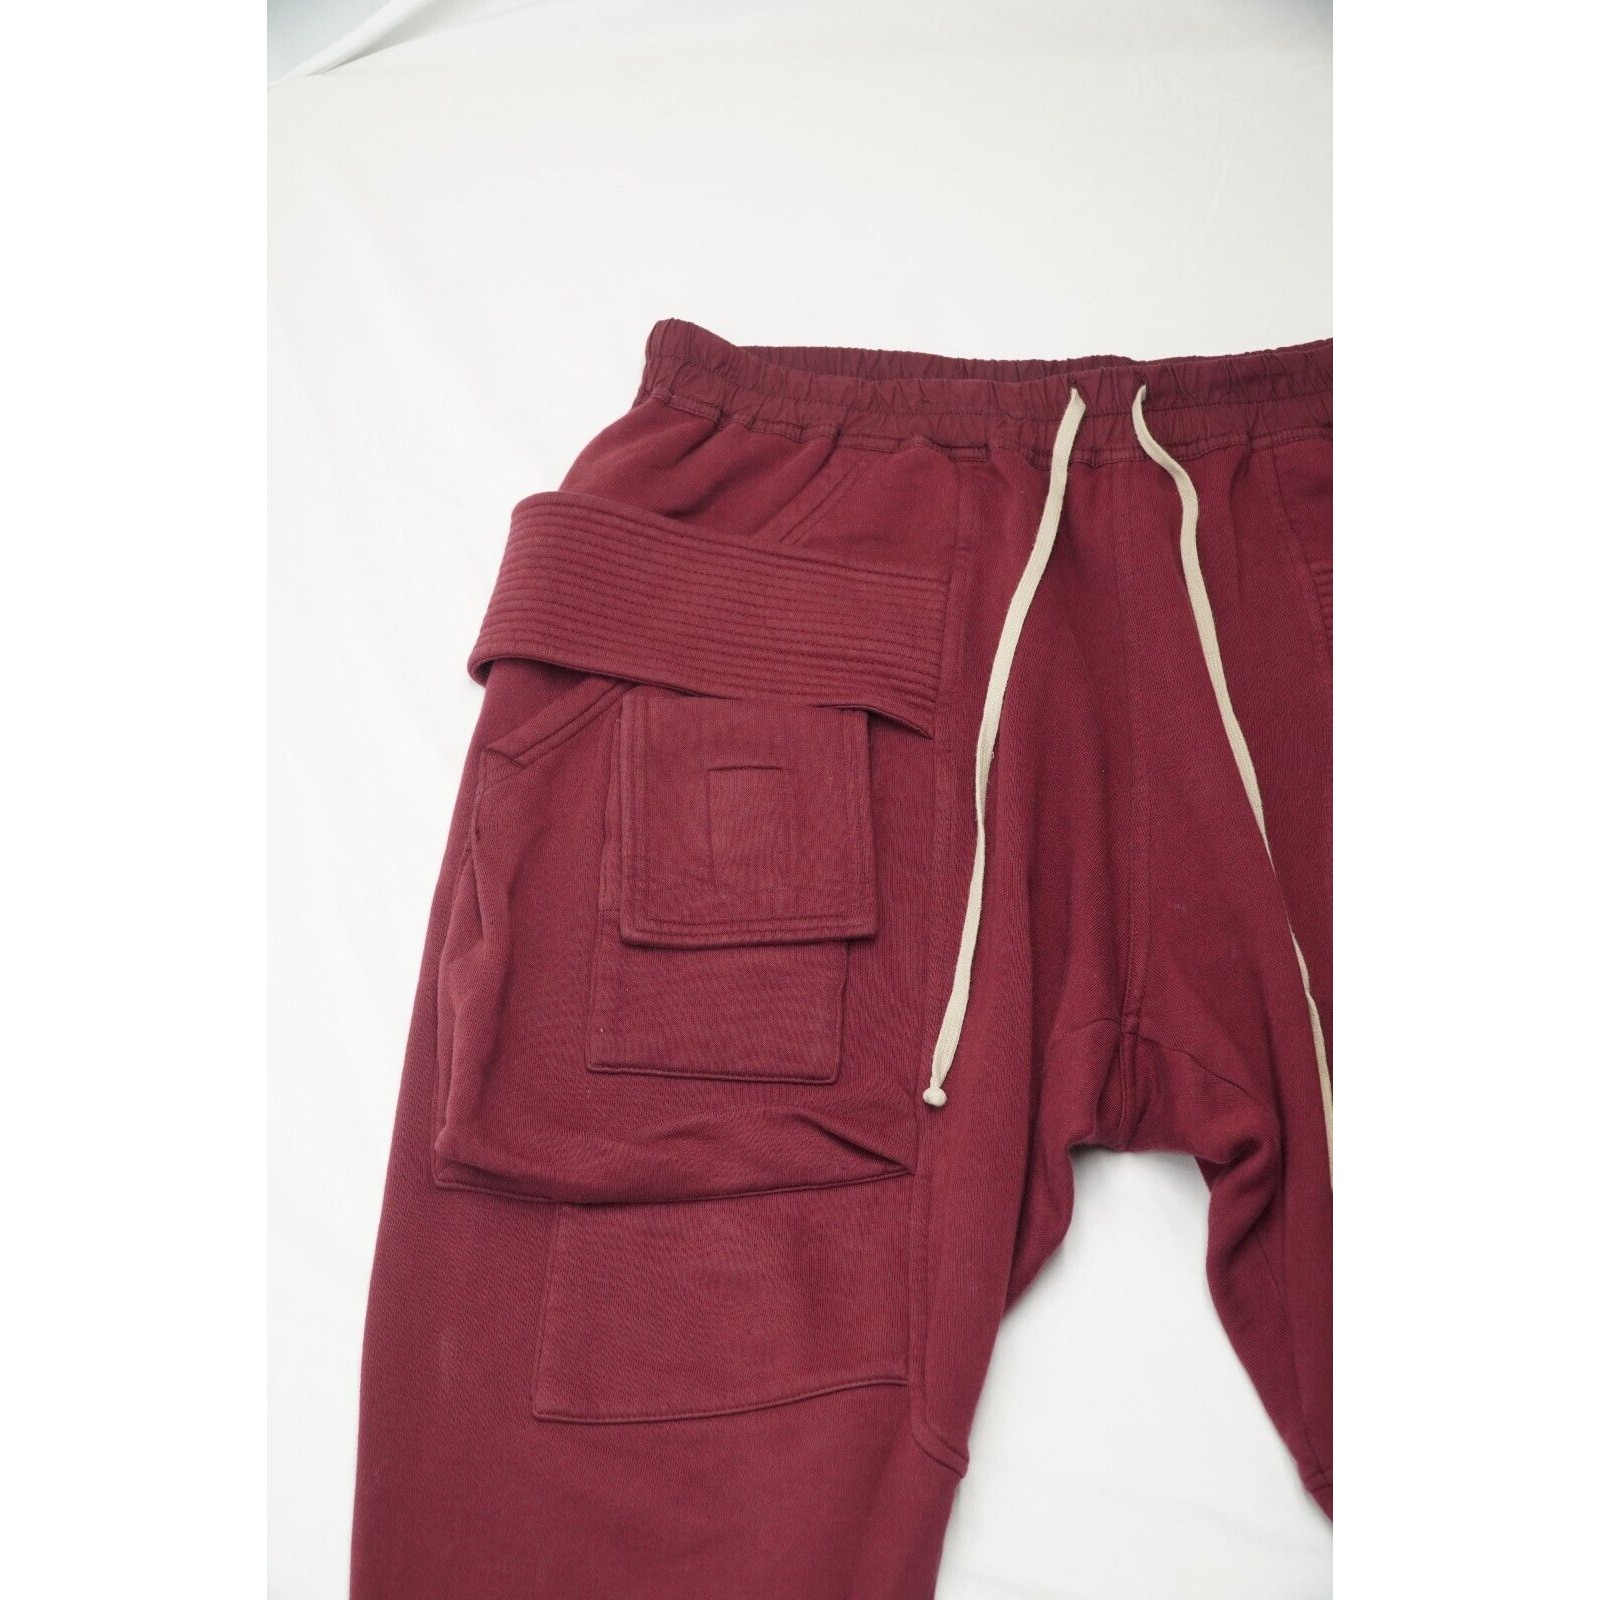 Rick Creatch Cargo Cropped Sweatpant Bruise Red FW20 - 8